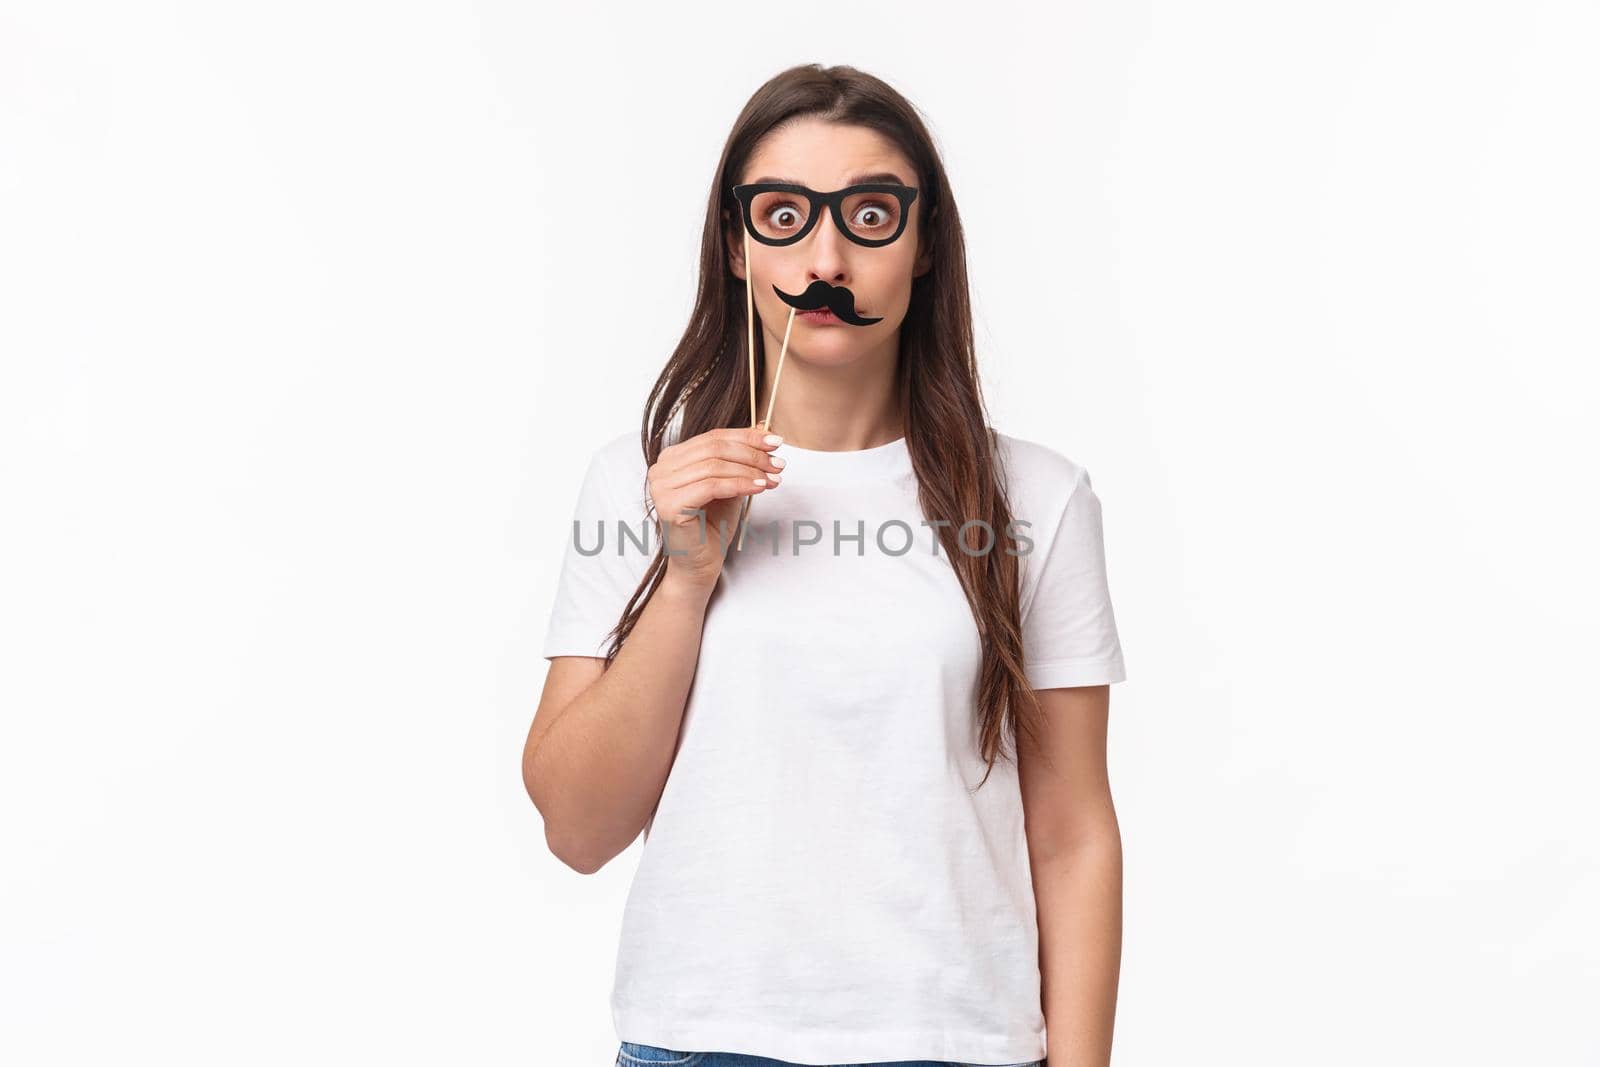 Entertainment, fun and holidays concept. Portrait of funny, playful and carefree girl holding carnaval mask sticks, fancy moustache and glasses, staring camera with popped eyes, white background.